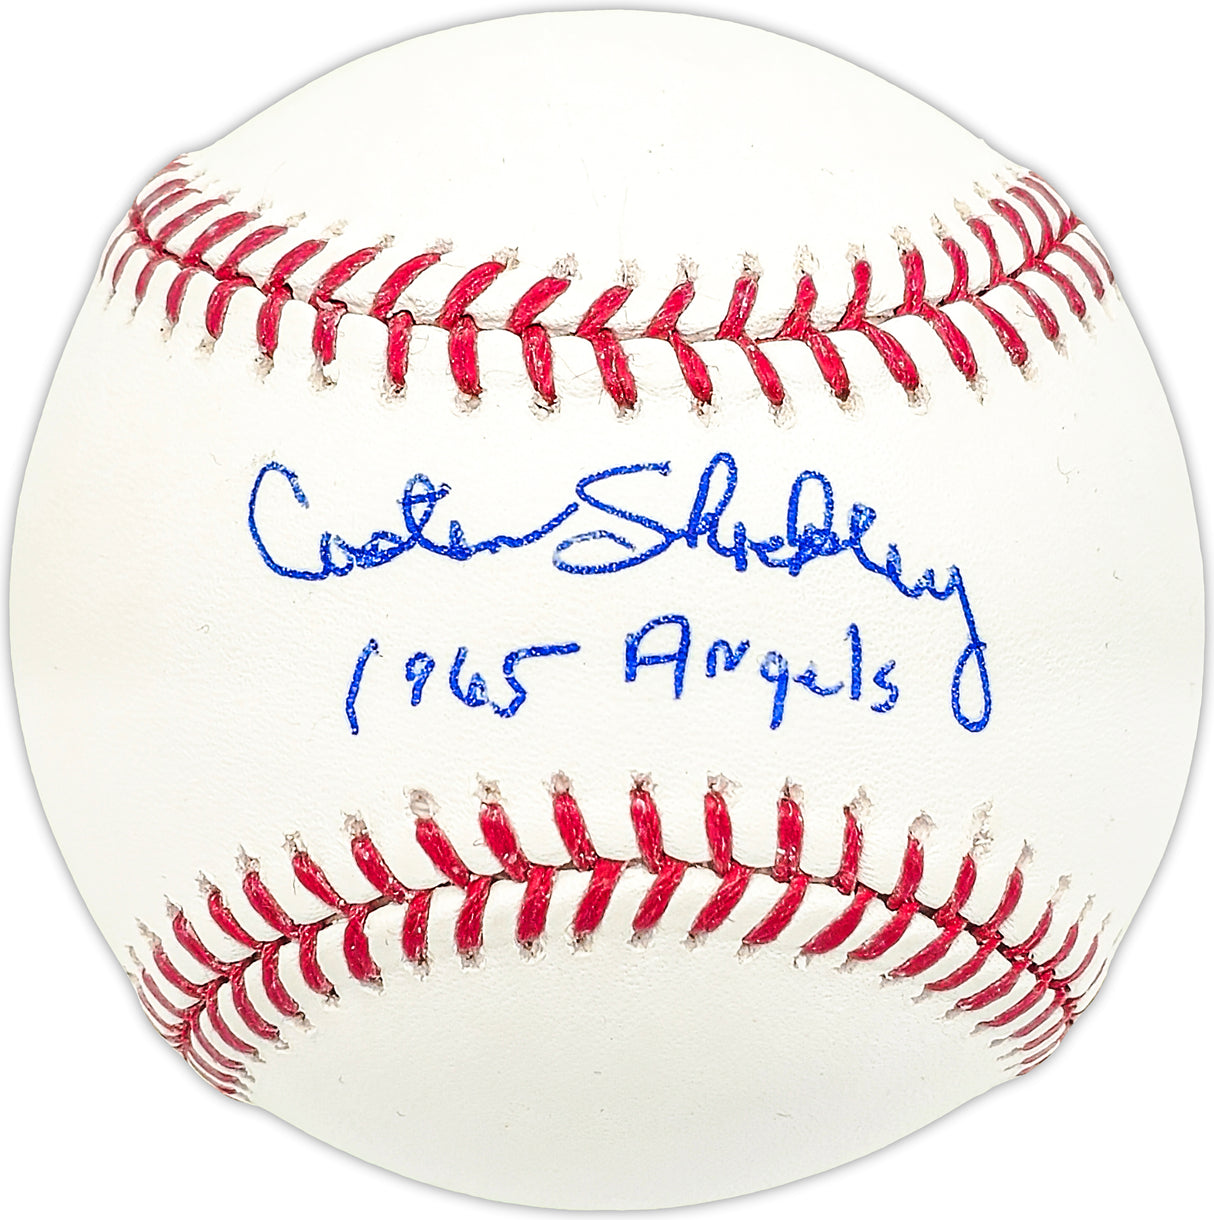 Costen Shockley Autographed Official MLB Baseball California Angels "1965 Angels" SKU #227582